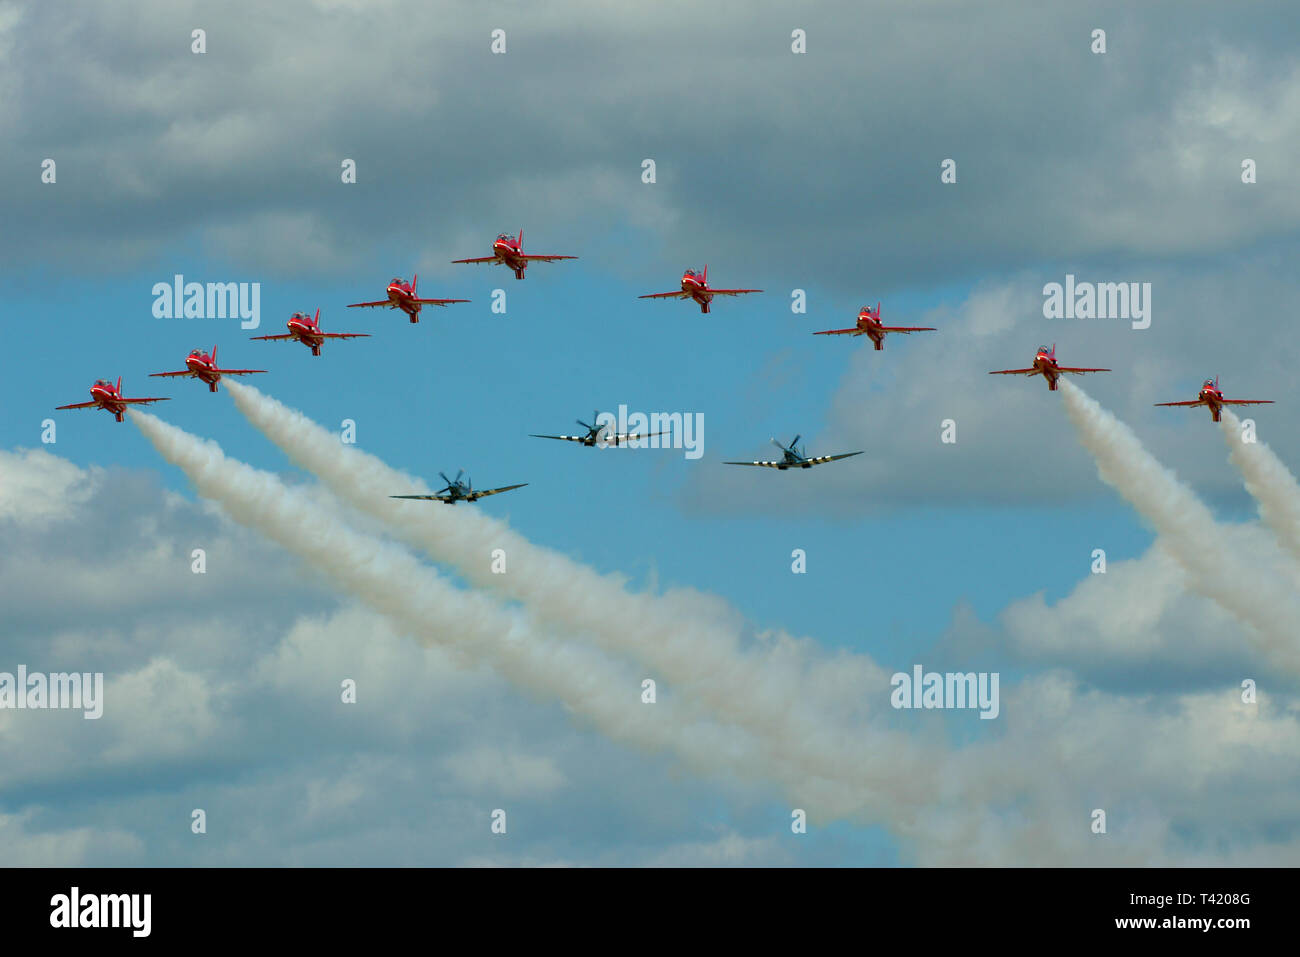 RAF Spitfires with Red Arrows Hawk T1 jet planes flying at the Royal International Air Tattoo, UK. Photo reconnaissance tribute flypast Stock Photo